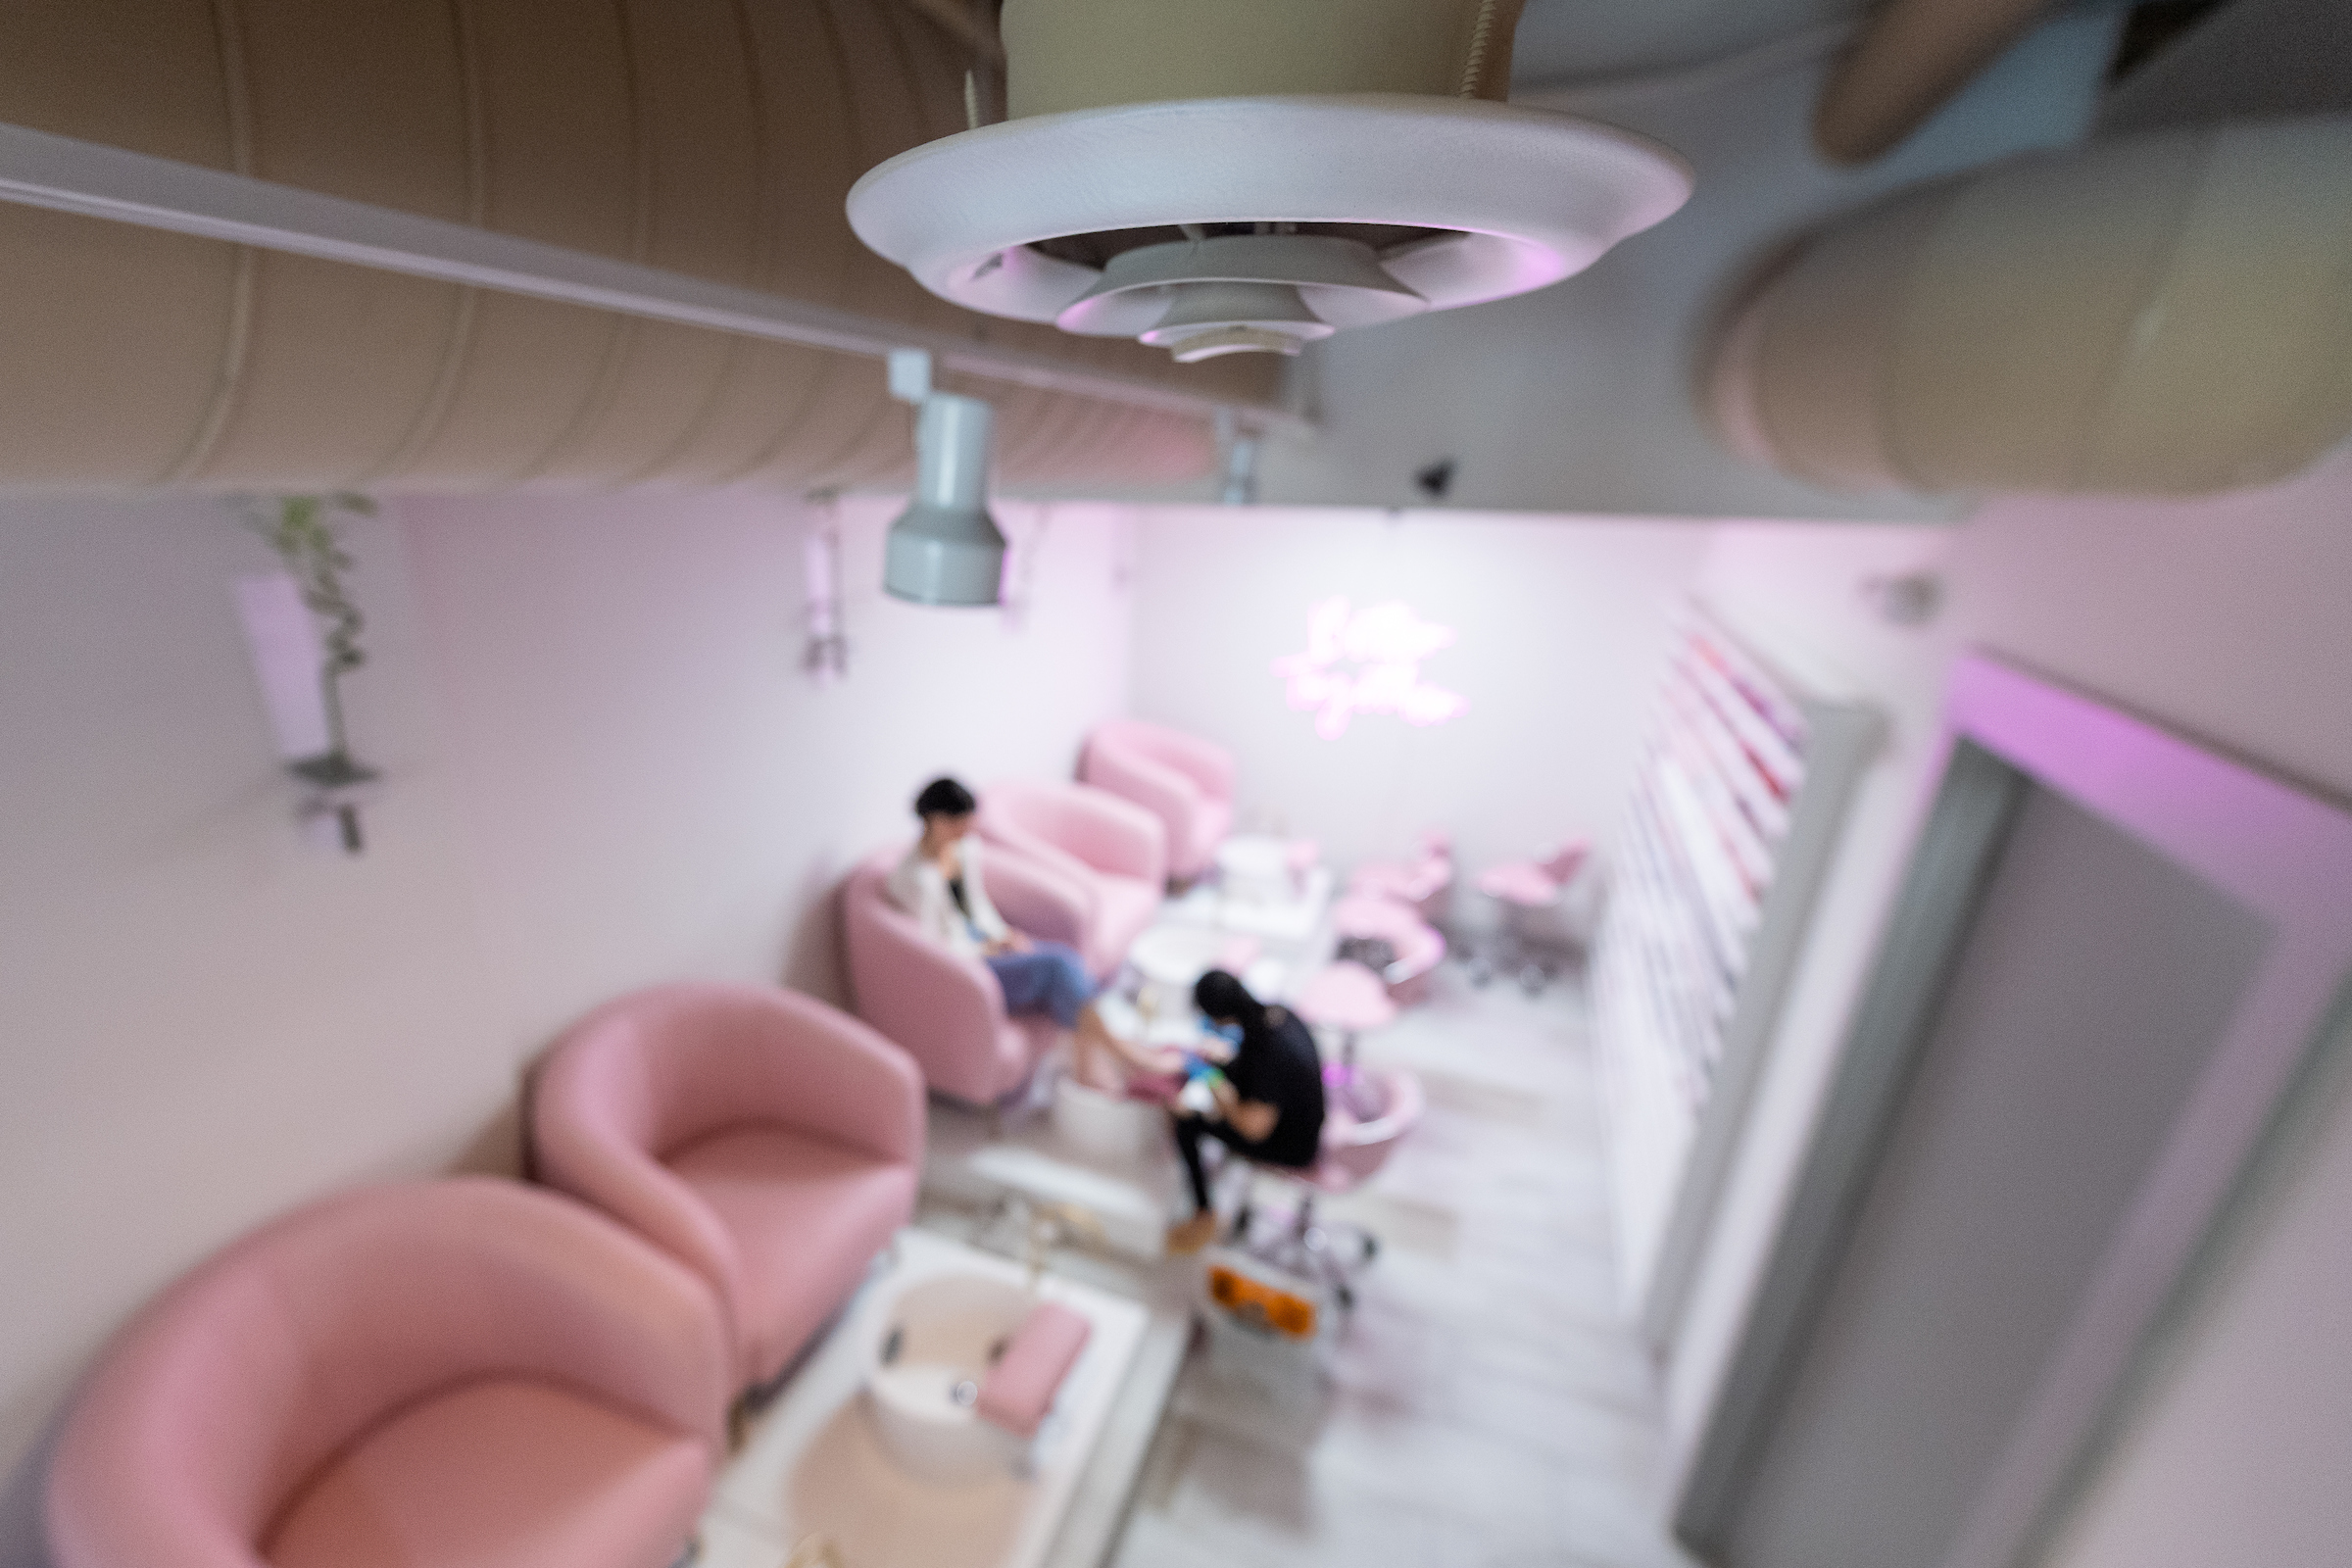 A ventilation system on the ceiling of a nail salon.